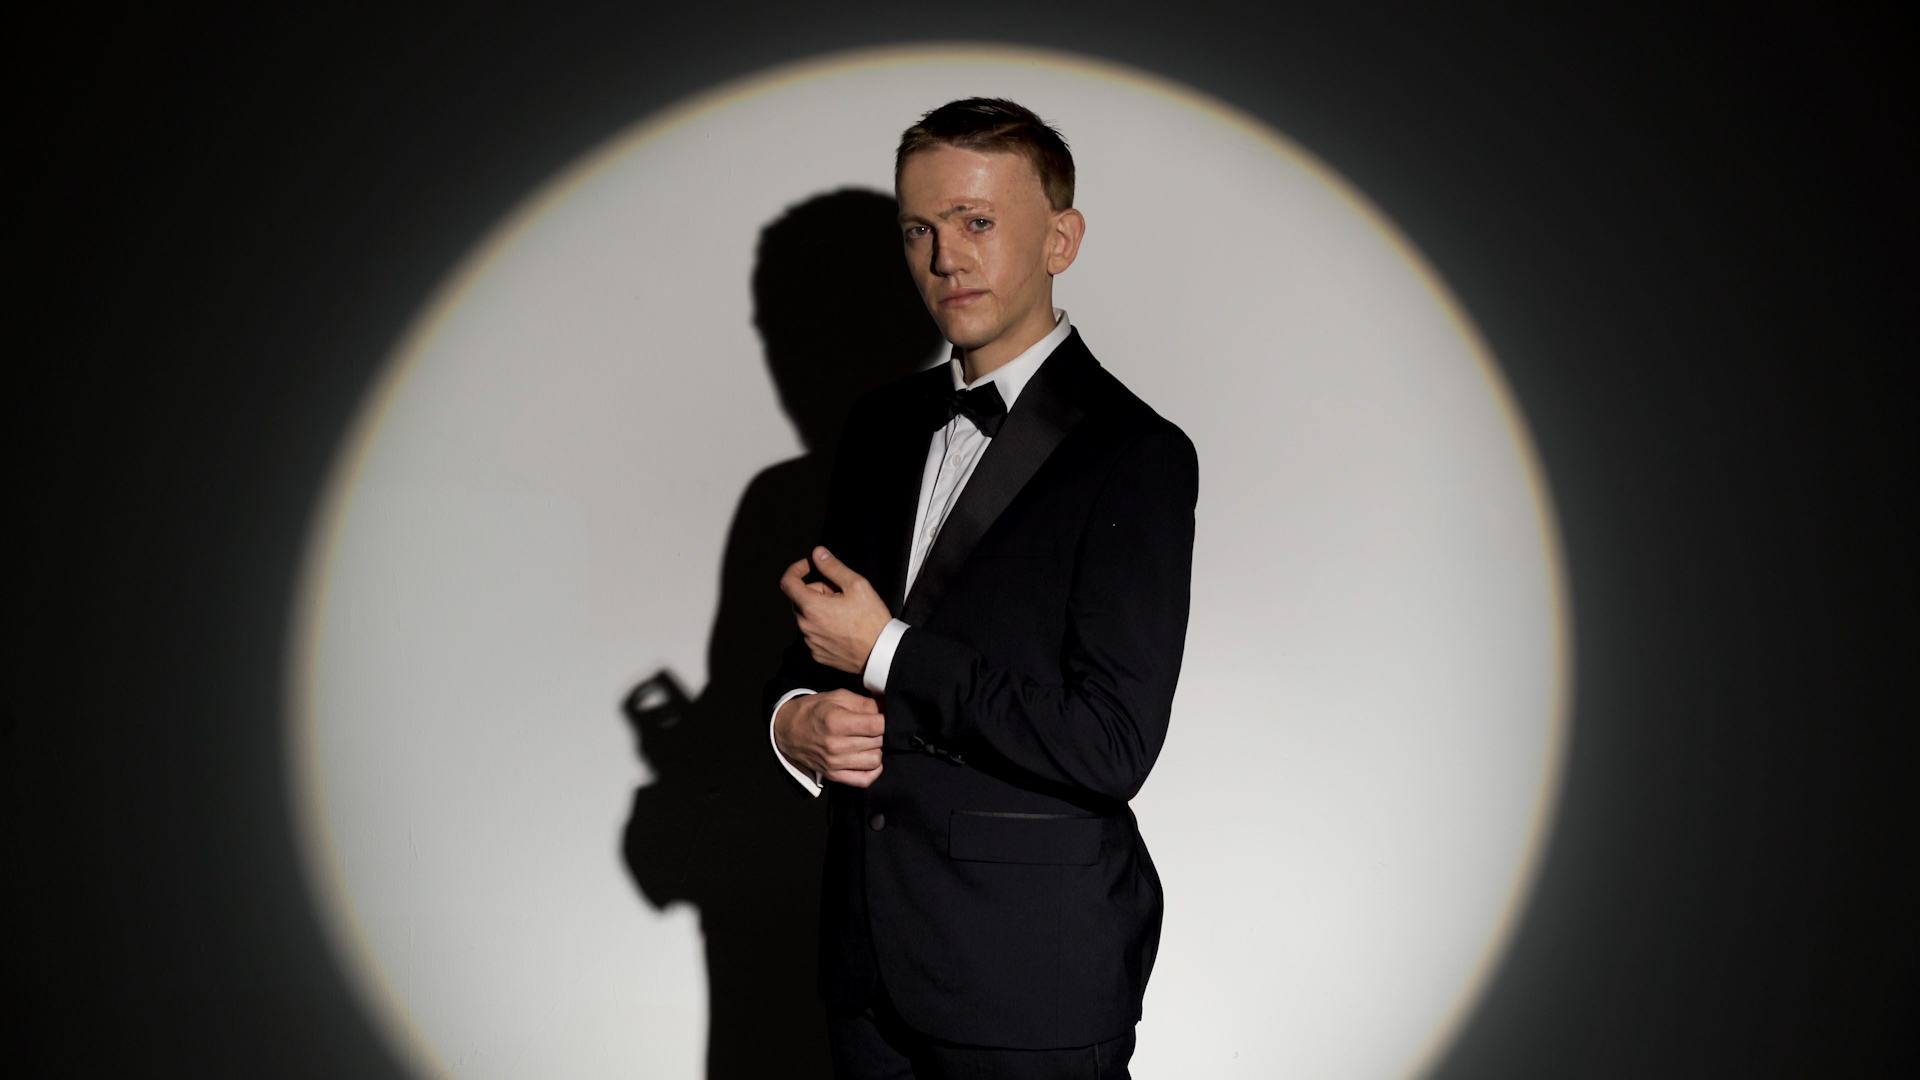 A man with a facial visible difference dressed as James Bond, in a black suit and bow tie, illuminated by a spotlight.